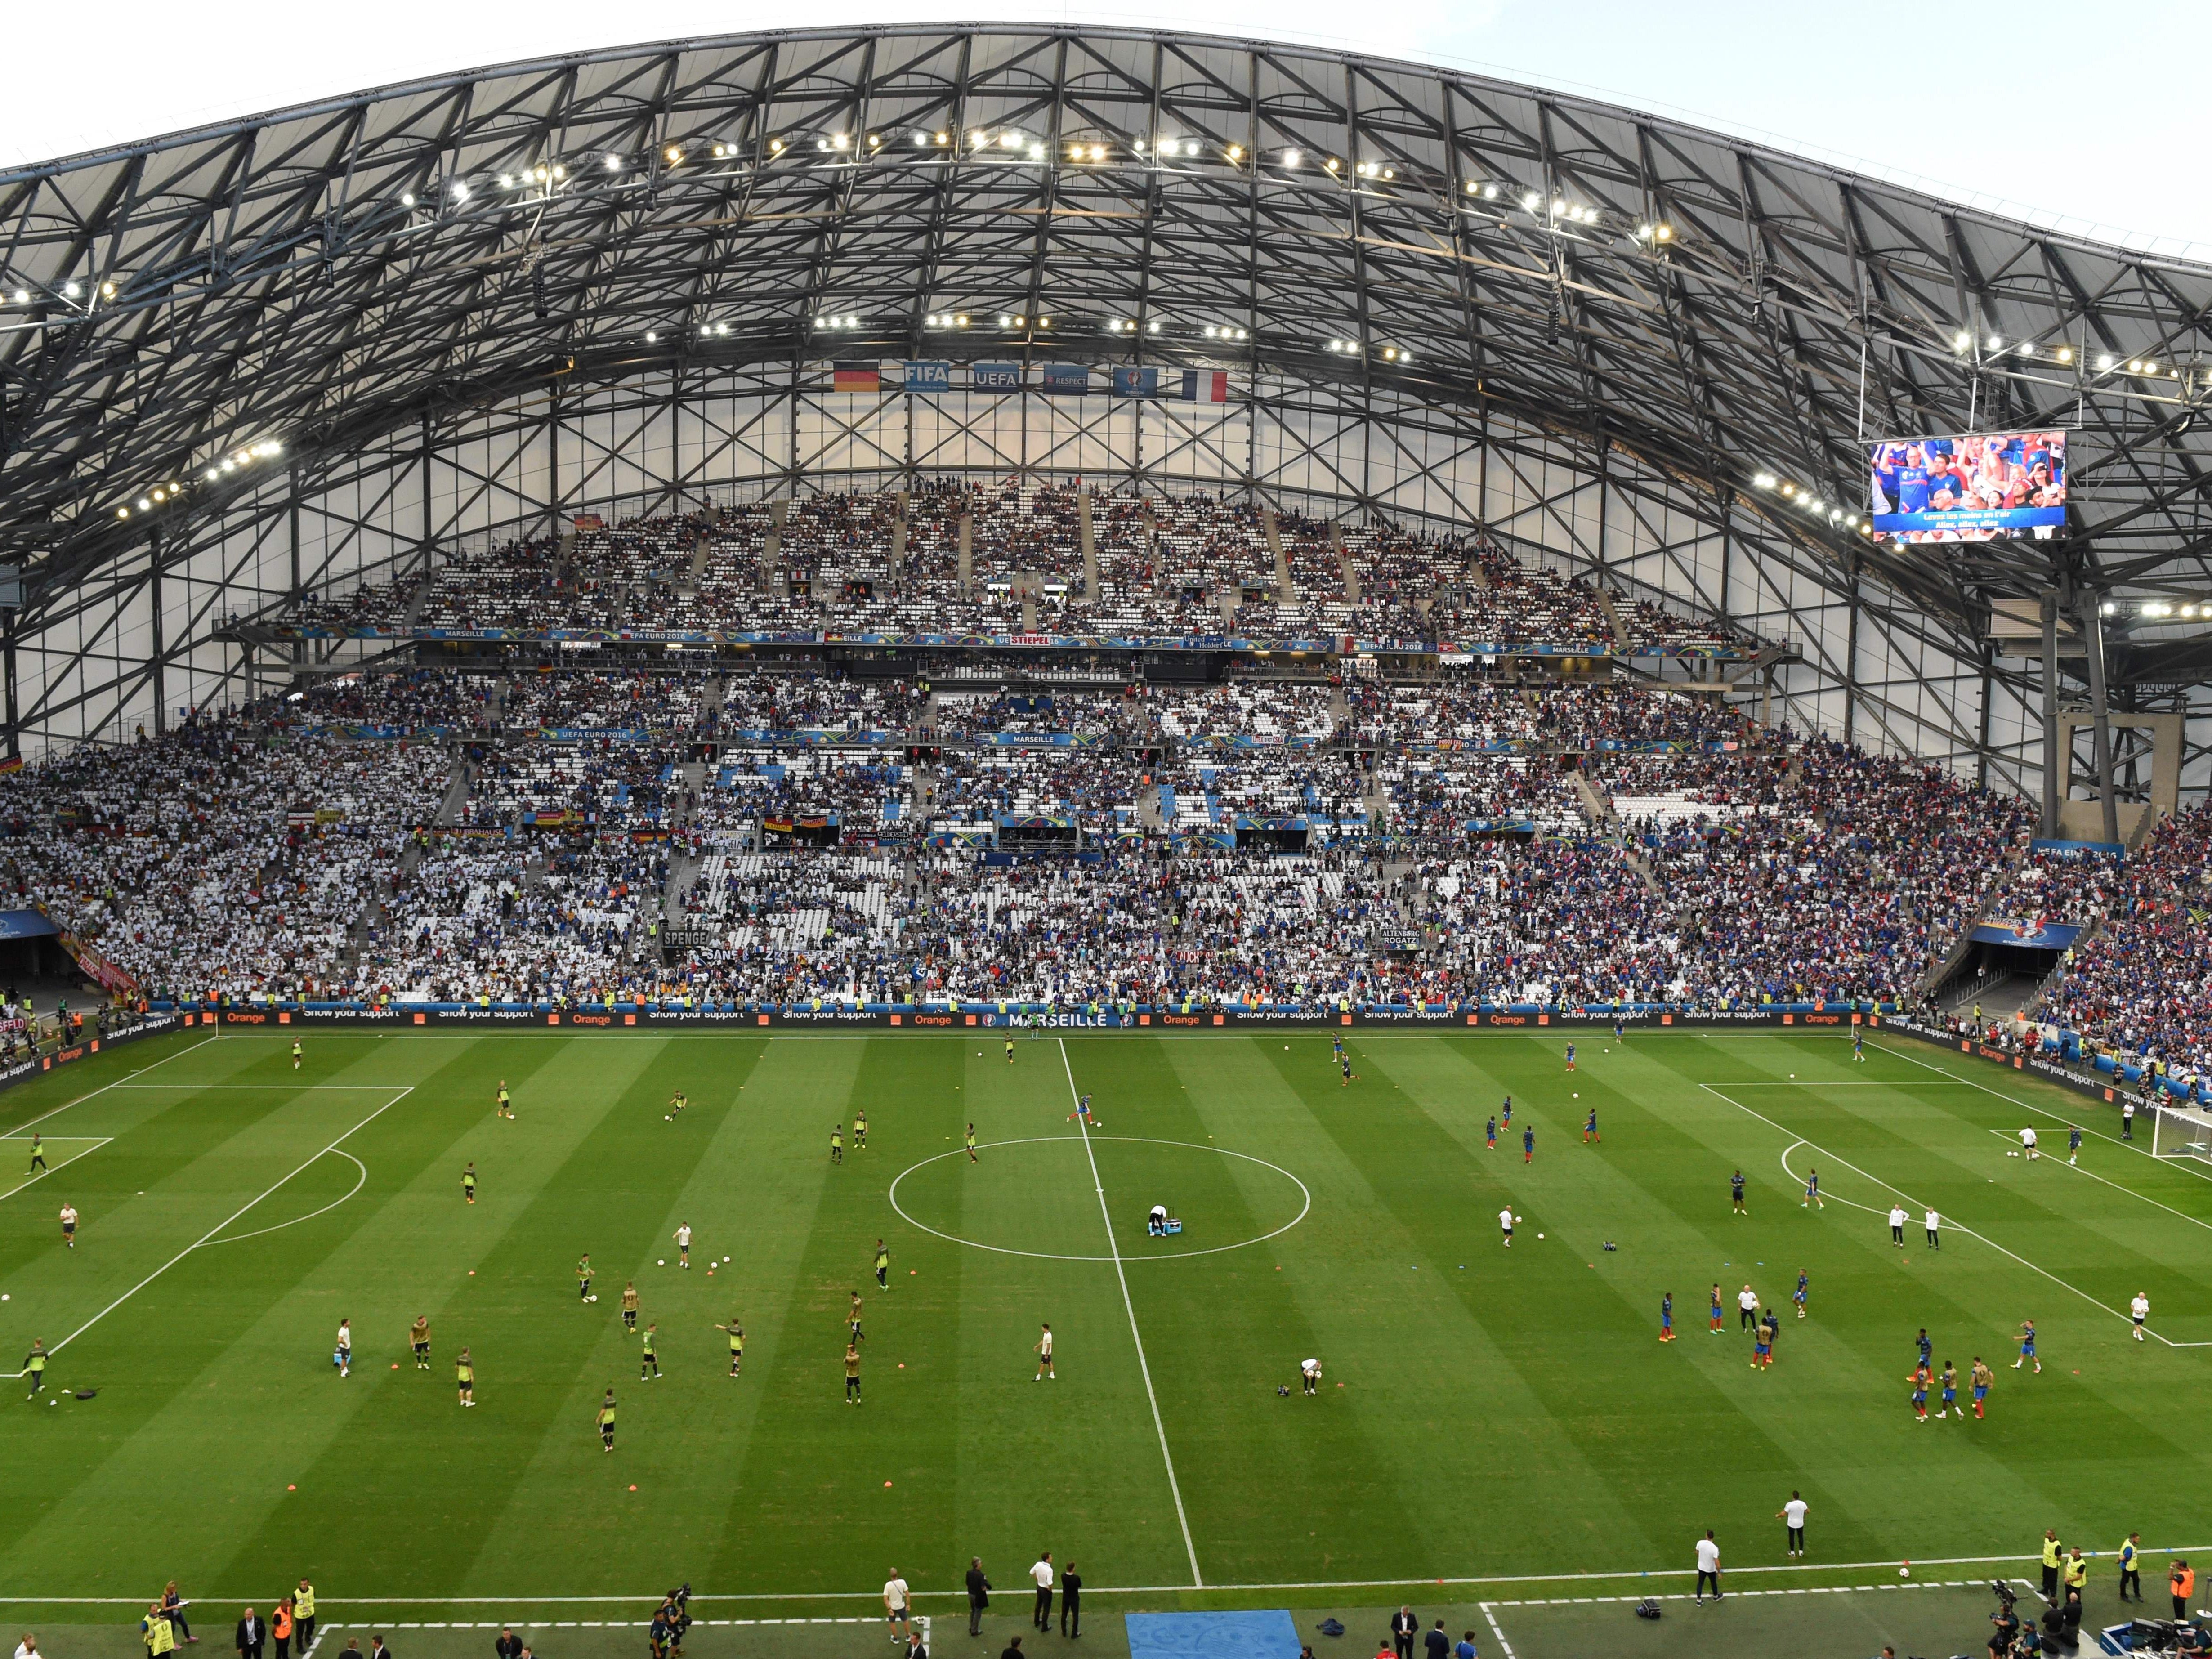 A general view of the Stade Orange Vélodrome